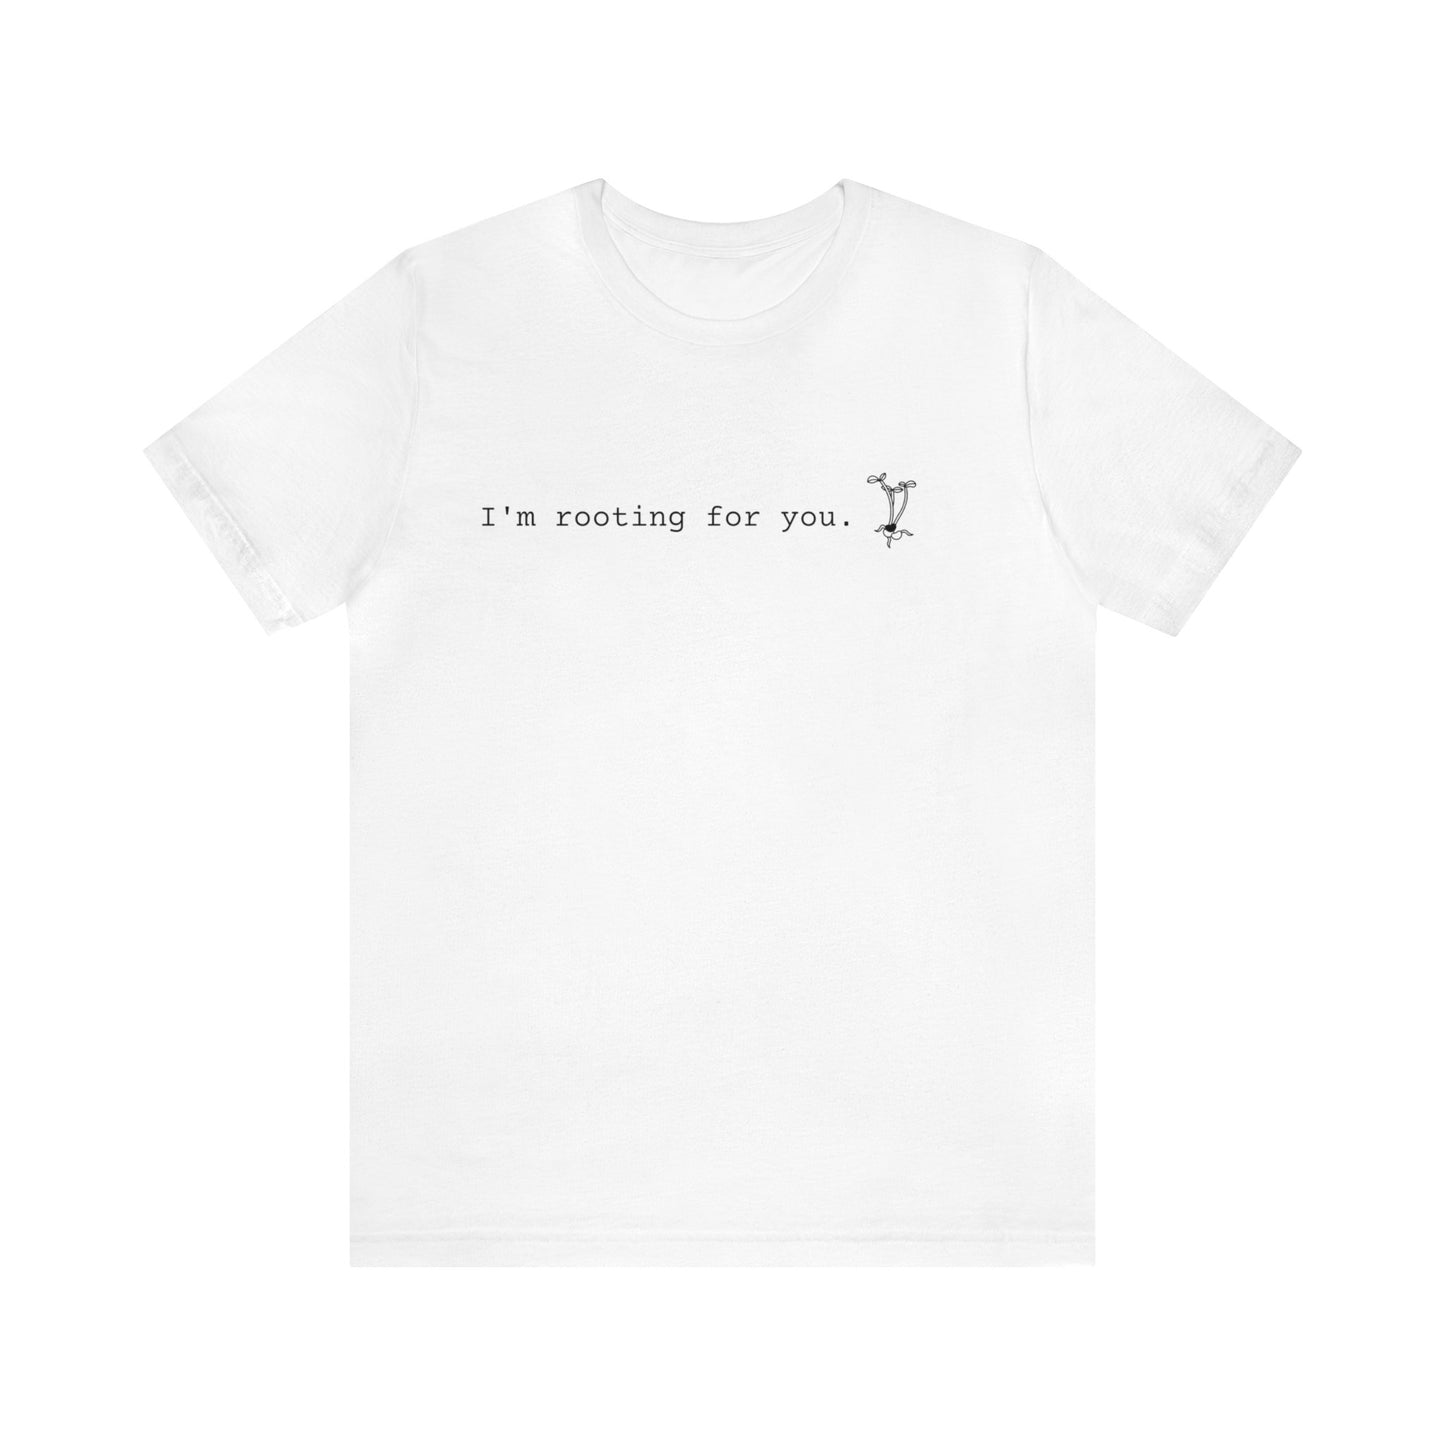 I'm Rooting for You Short Sleeve Unisex T-Shirt